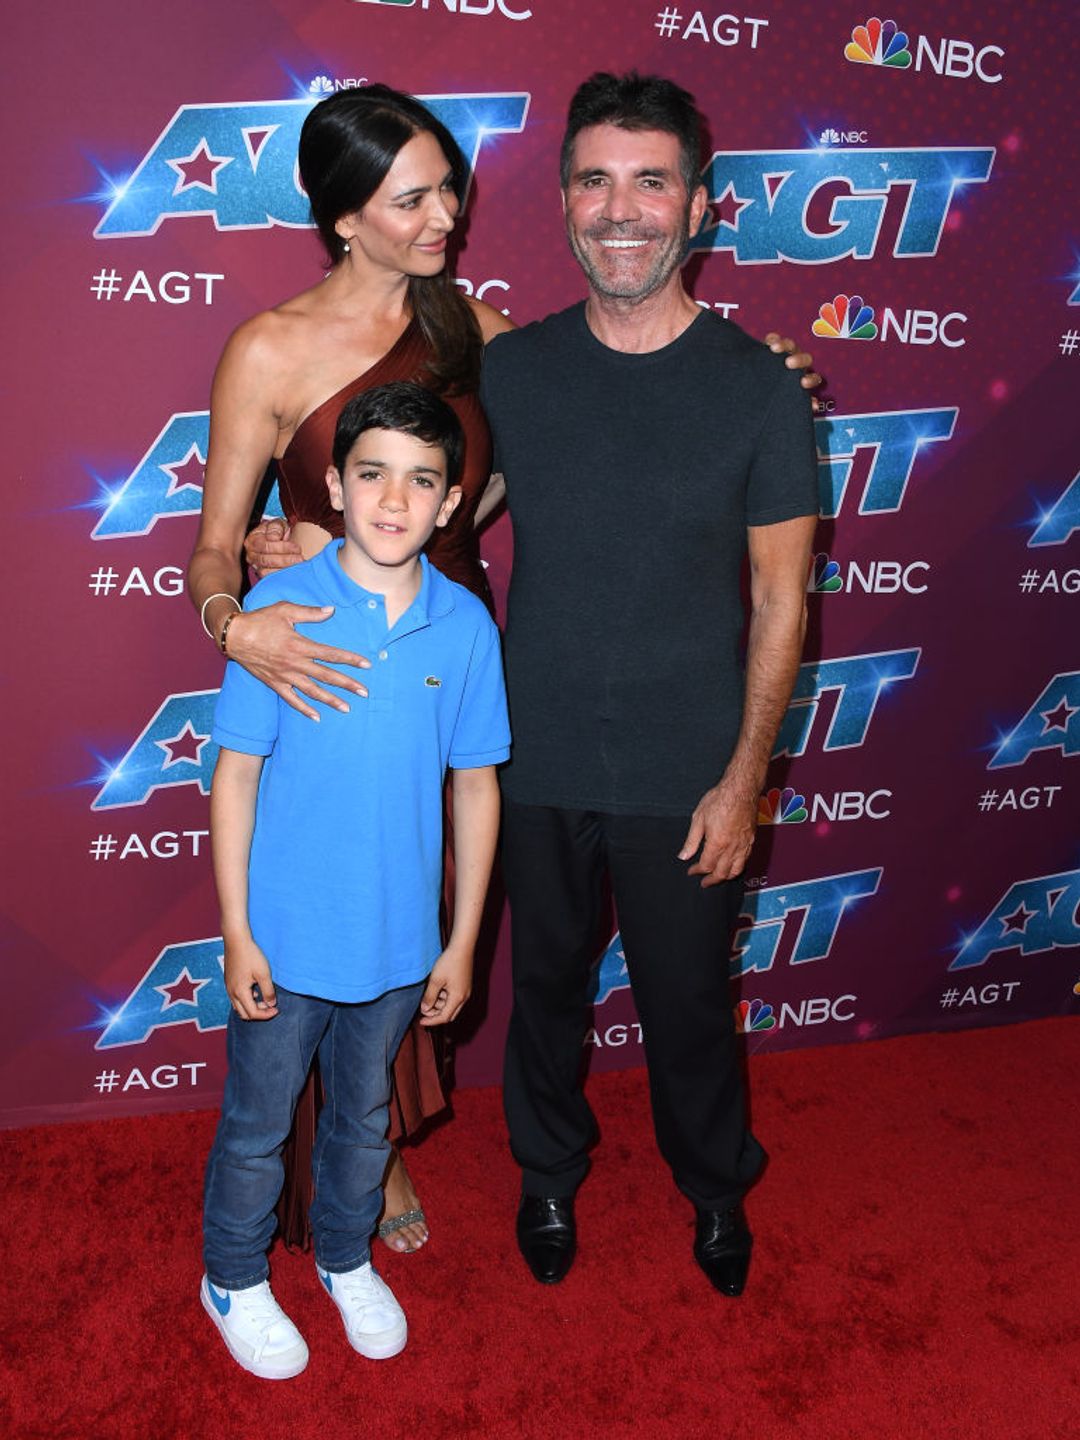 Lauren Silverman, Eric Cowell and Simon Cowellarrives at the Red Carpet For "America's Got Talent" Season 17 Live Show in 2022